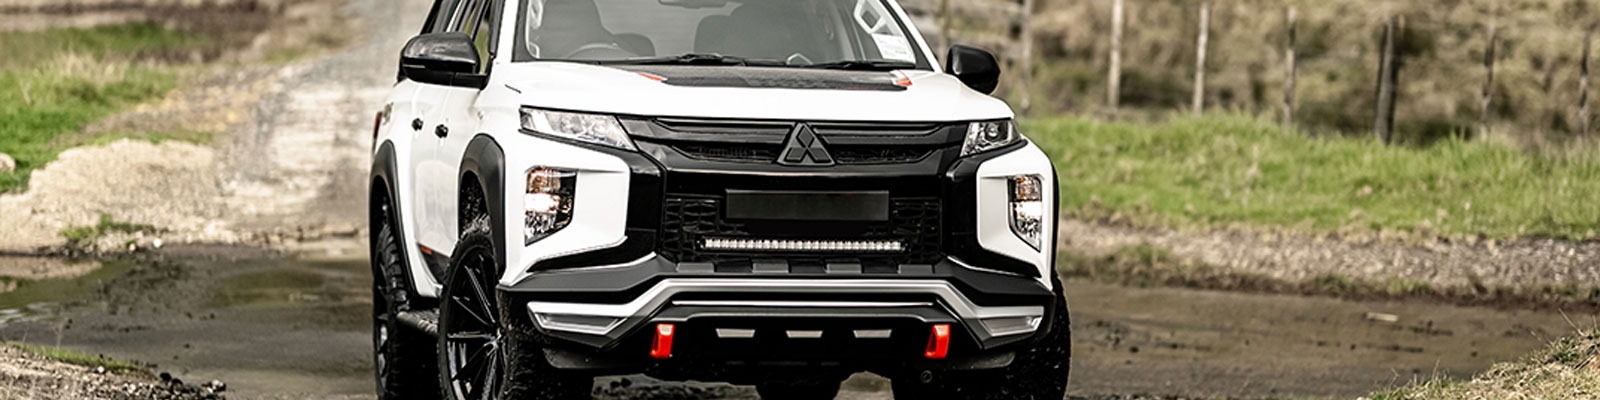 Accessories For Mitsubishi L200 Series 6 Double Cab 2019 On